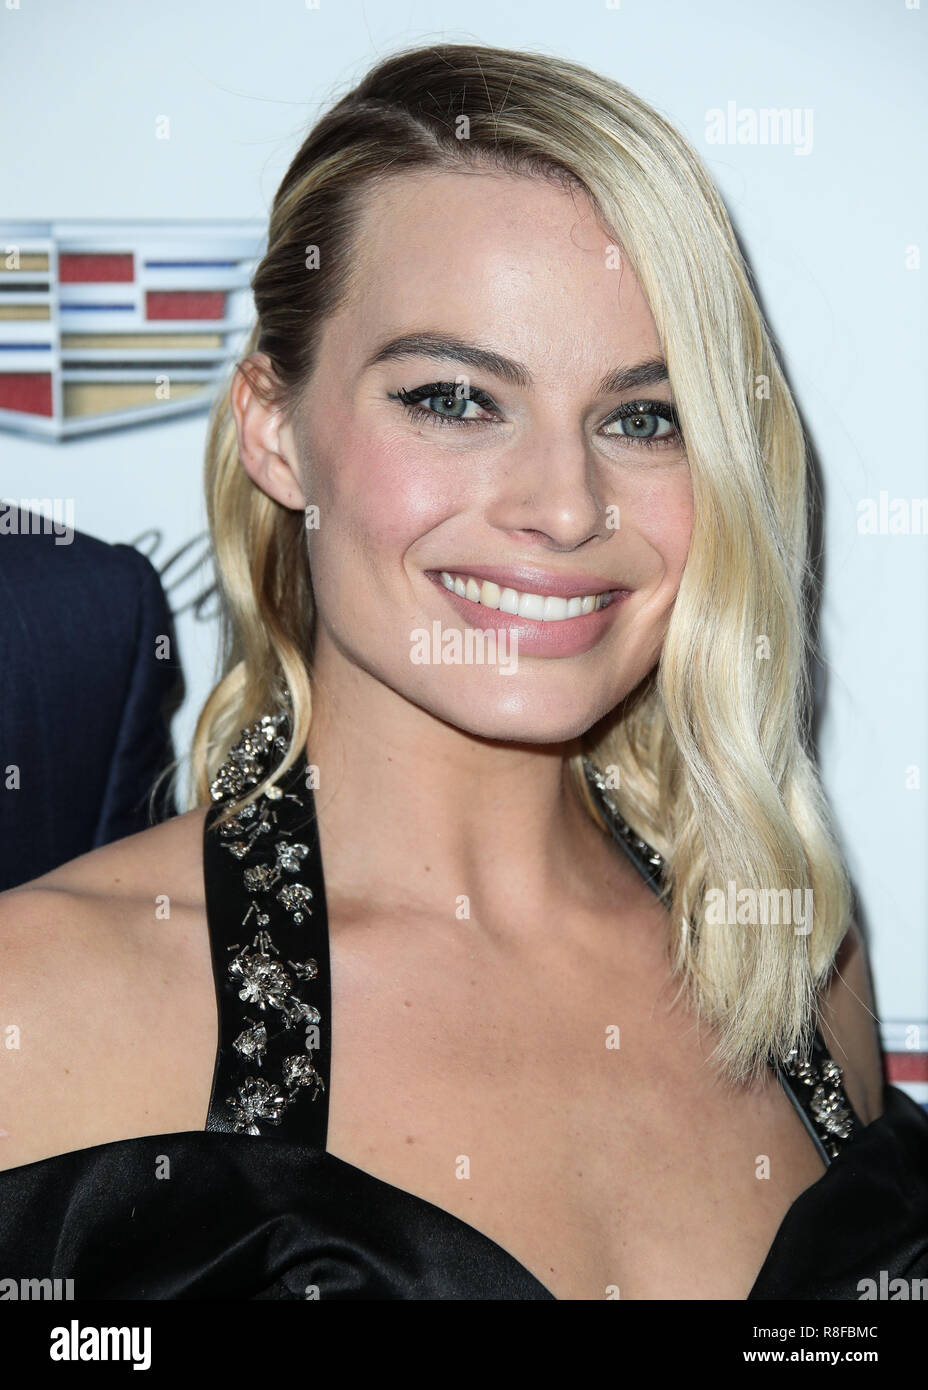 BEVERLY HILLS, LOS ANGELES, CA, USA - JANUARY 20: Margot Robbie at the 29th Annual Producers Guild Awards held at The Beverly Hilton Hotel on January 20, 2018 in Beverly Hills, Los Angeles, California, United States. (Photo by Xavier Collin/Image Press Agency) Stock Photo